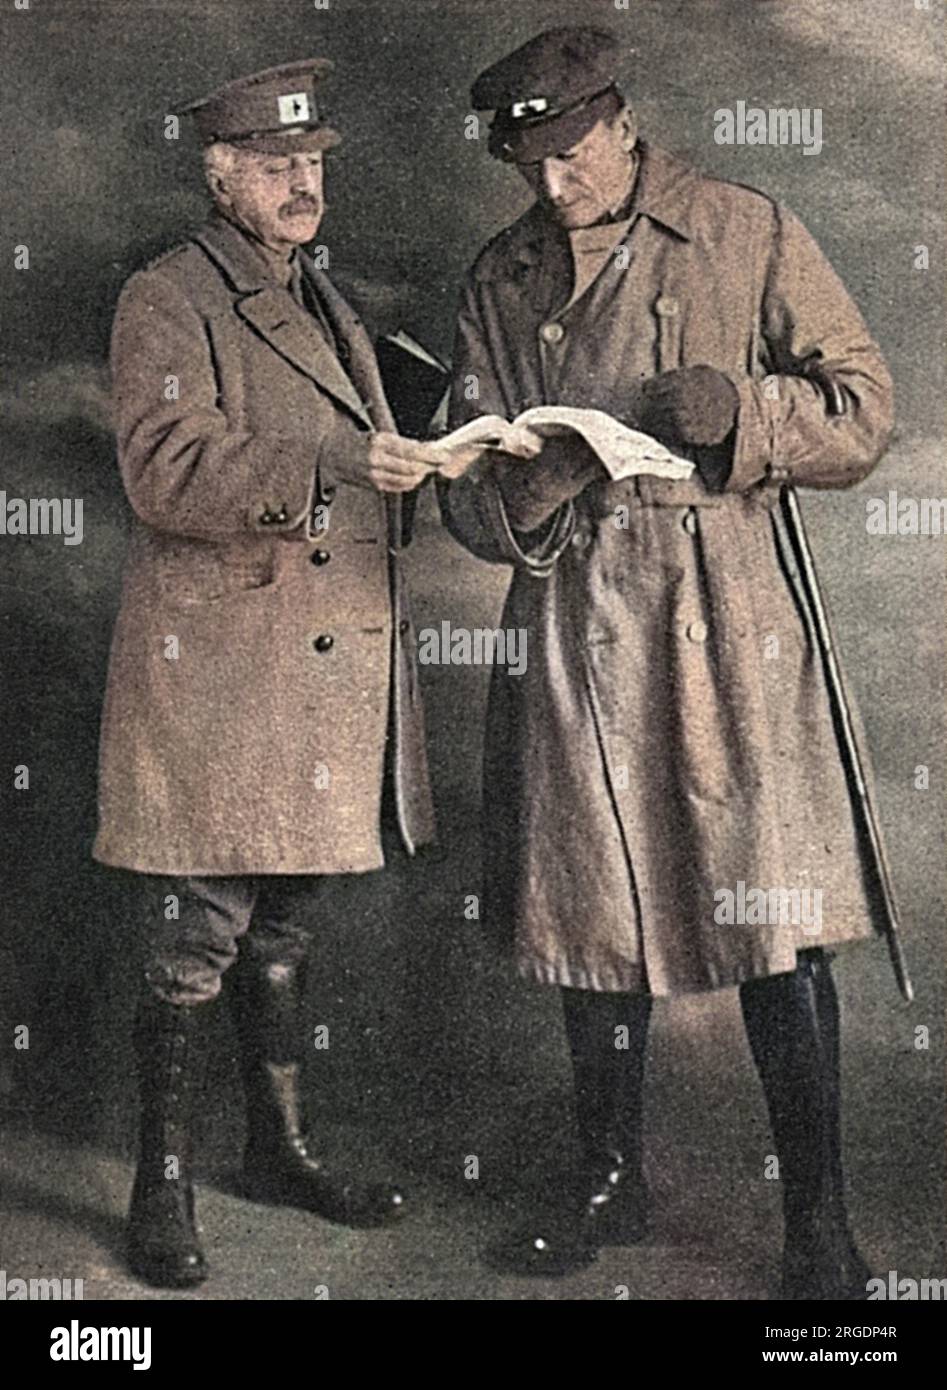 Algernon Henry Blackwood (1869 - 1951), English author and playwright, particularly known for his supernatural fiction and ghost stories, pictured here on the right with the Punch artist and comic illustrator, Alfred Taylor.  The Tatler reports that Blackwood was working with the Red Cross at Rouen as a searcher for missing men.  The Oxford Dictionary of National Biography does not mention this episode in Blackwood's life, but does note that he worked for British intelligence as an undercover agent in Switzerland during some of the war. Stock Photo